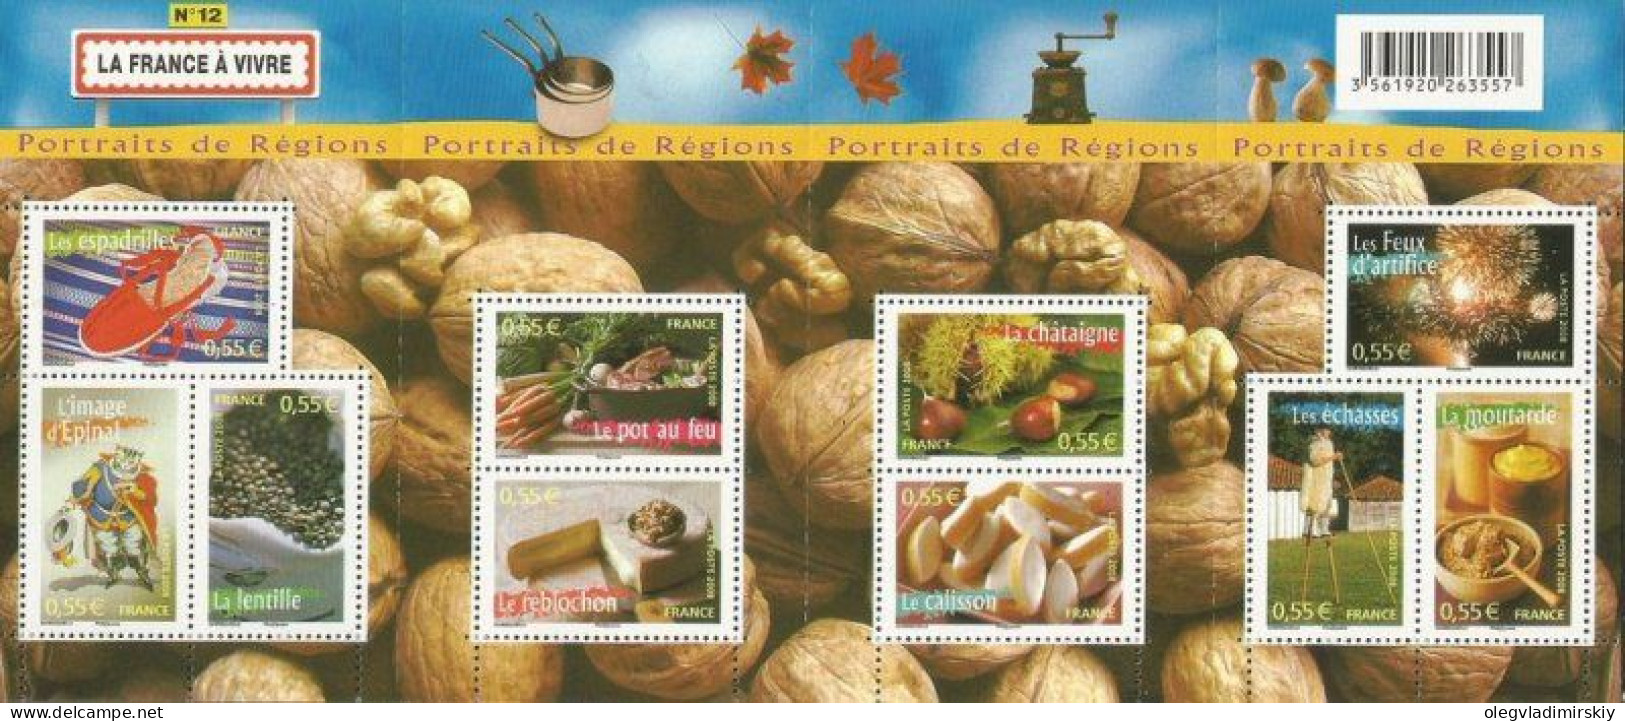 France 2008 Regions Provinces 12th Issue Set Of 10 Stamps In Block MNH - Ongebruikt